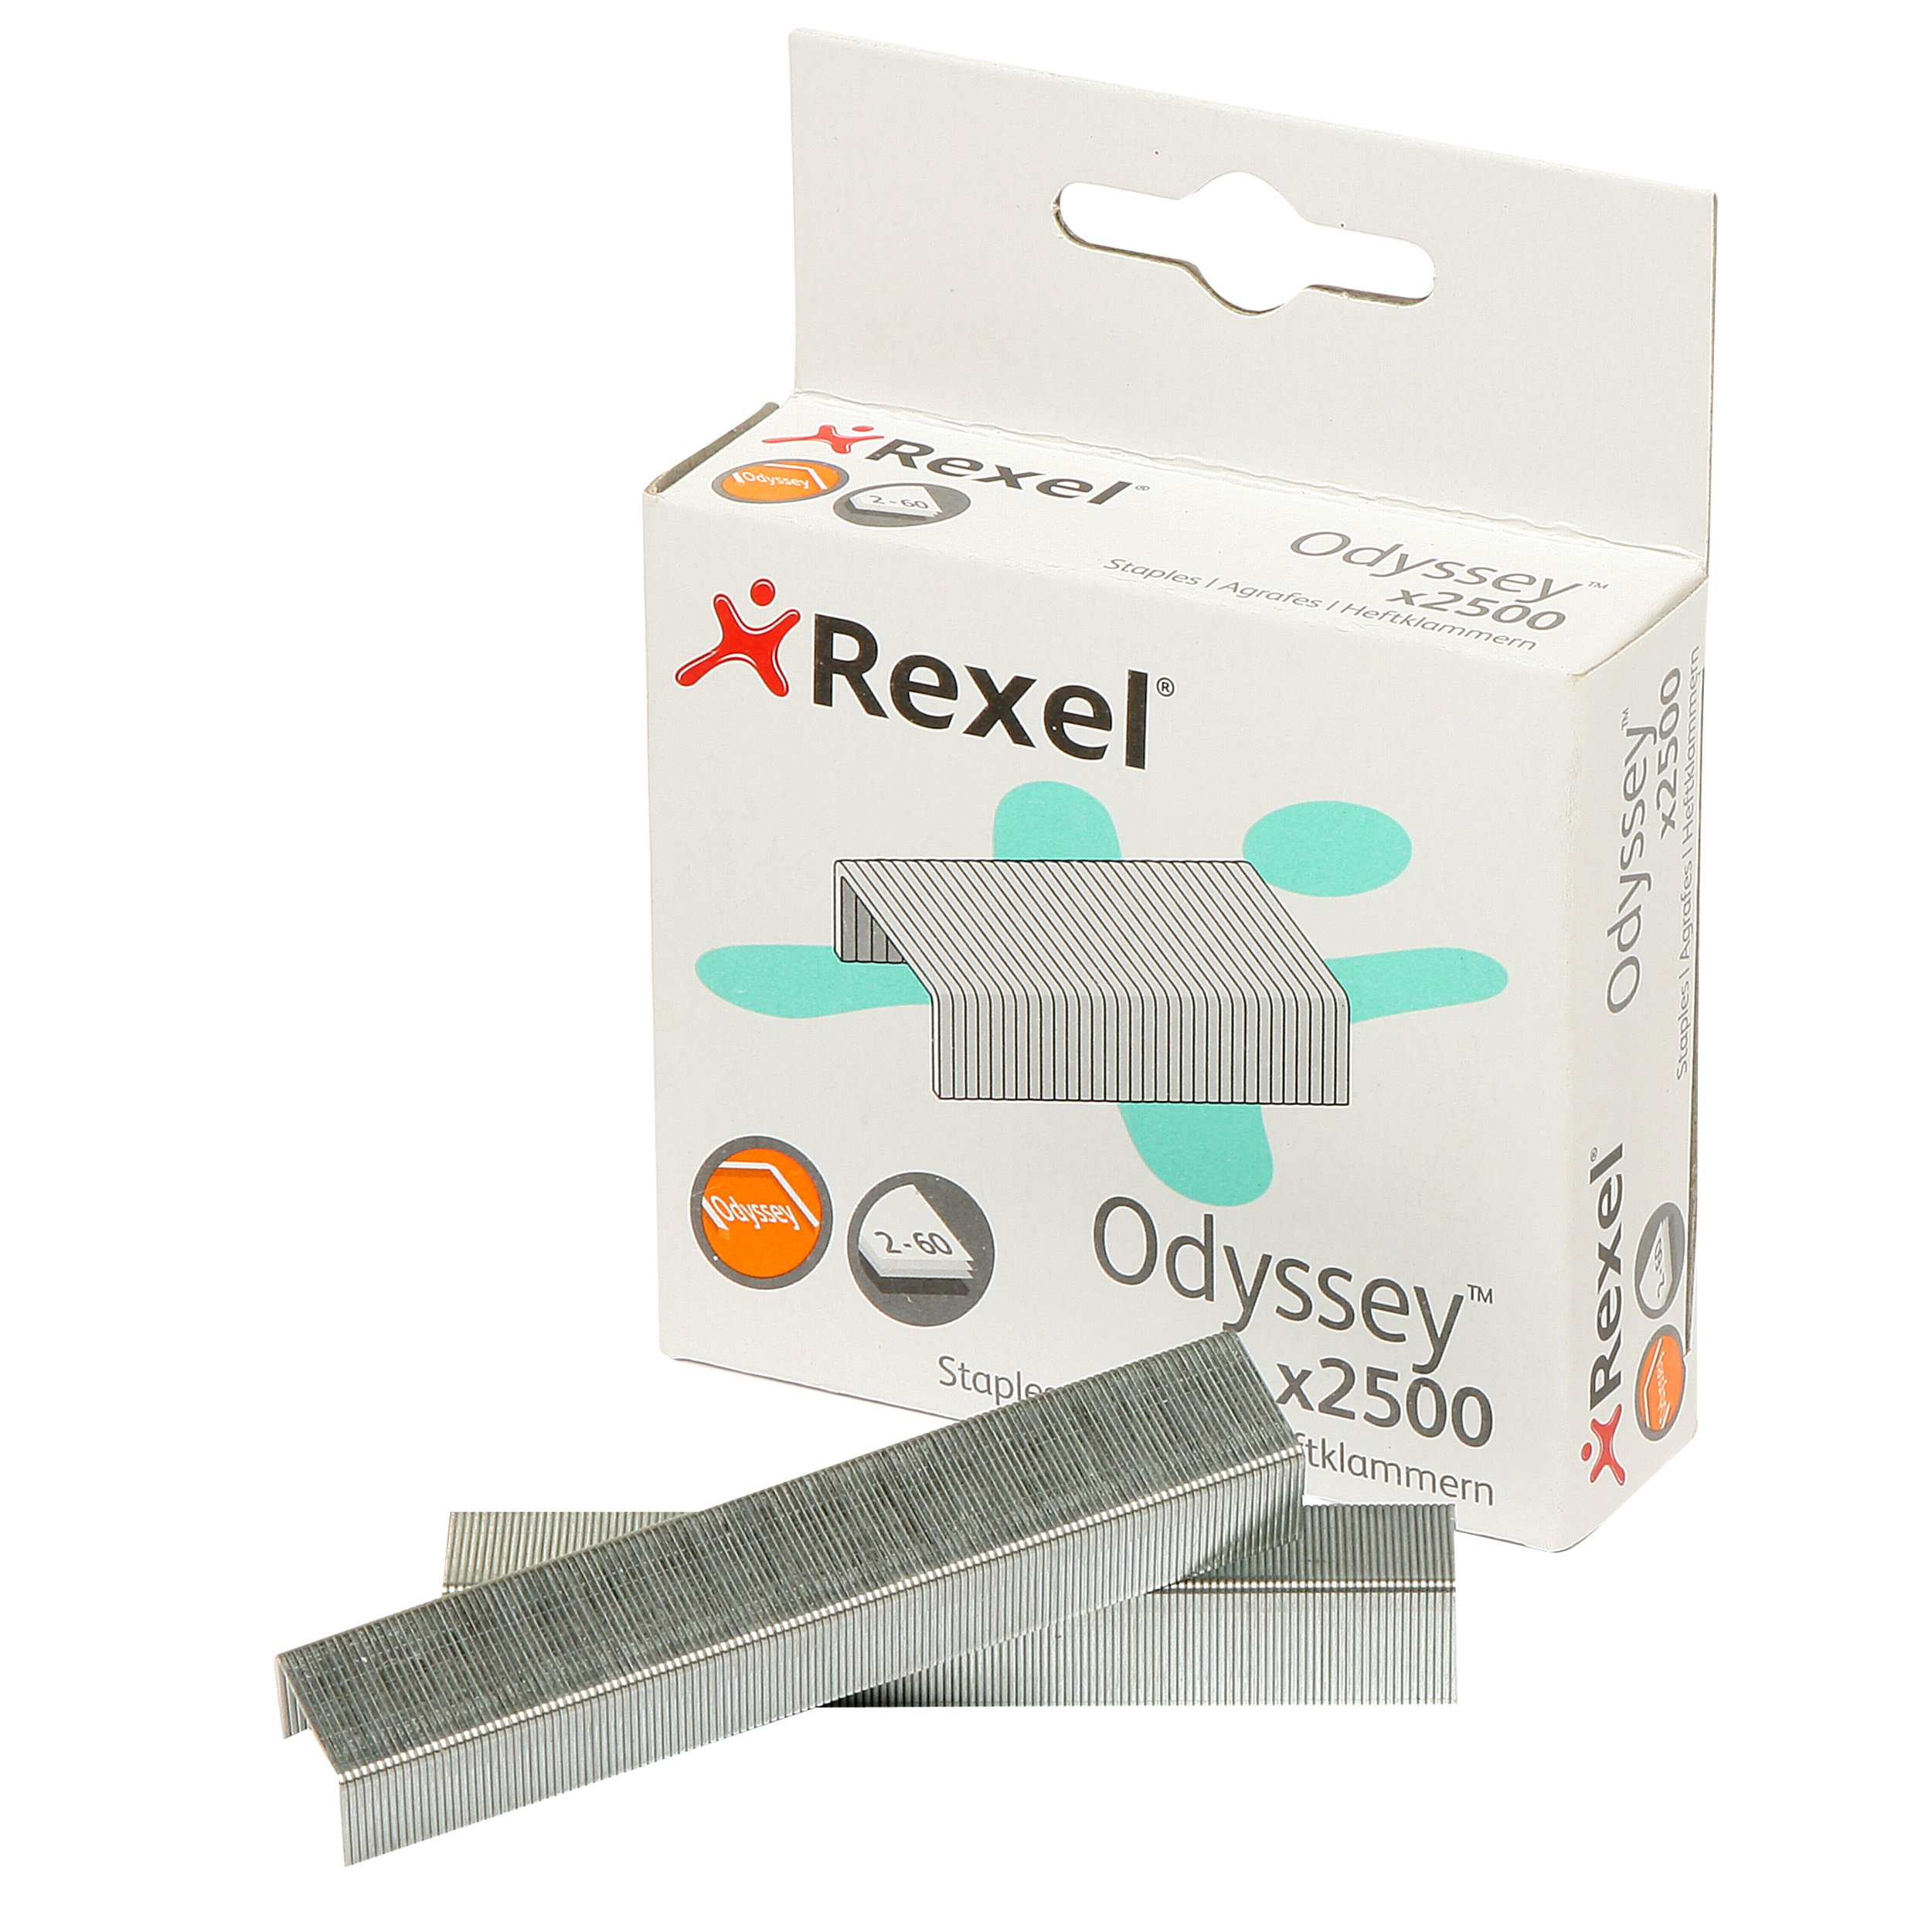 Rexel Odyssey Staples Box 2500 - Click Image to Close